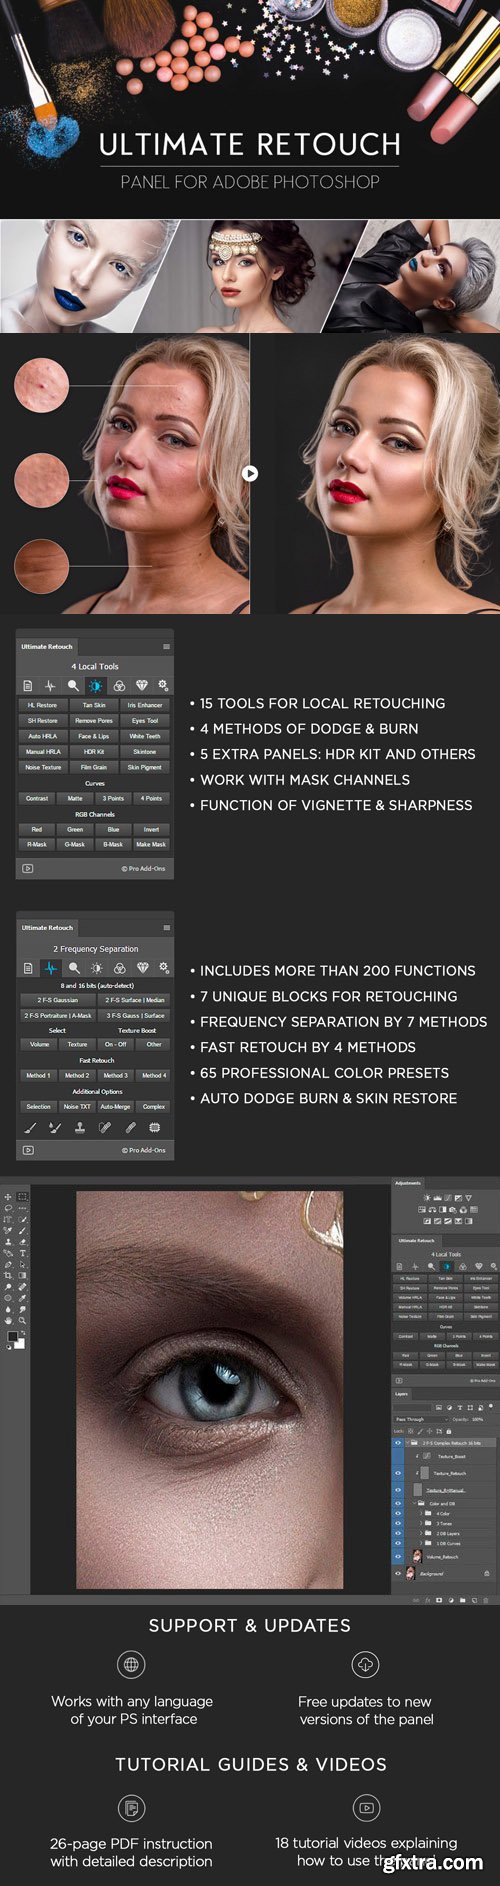 Ultimate Retouch Panel 3.7.72 Plugin for Adobe Photoshop